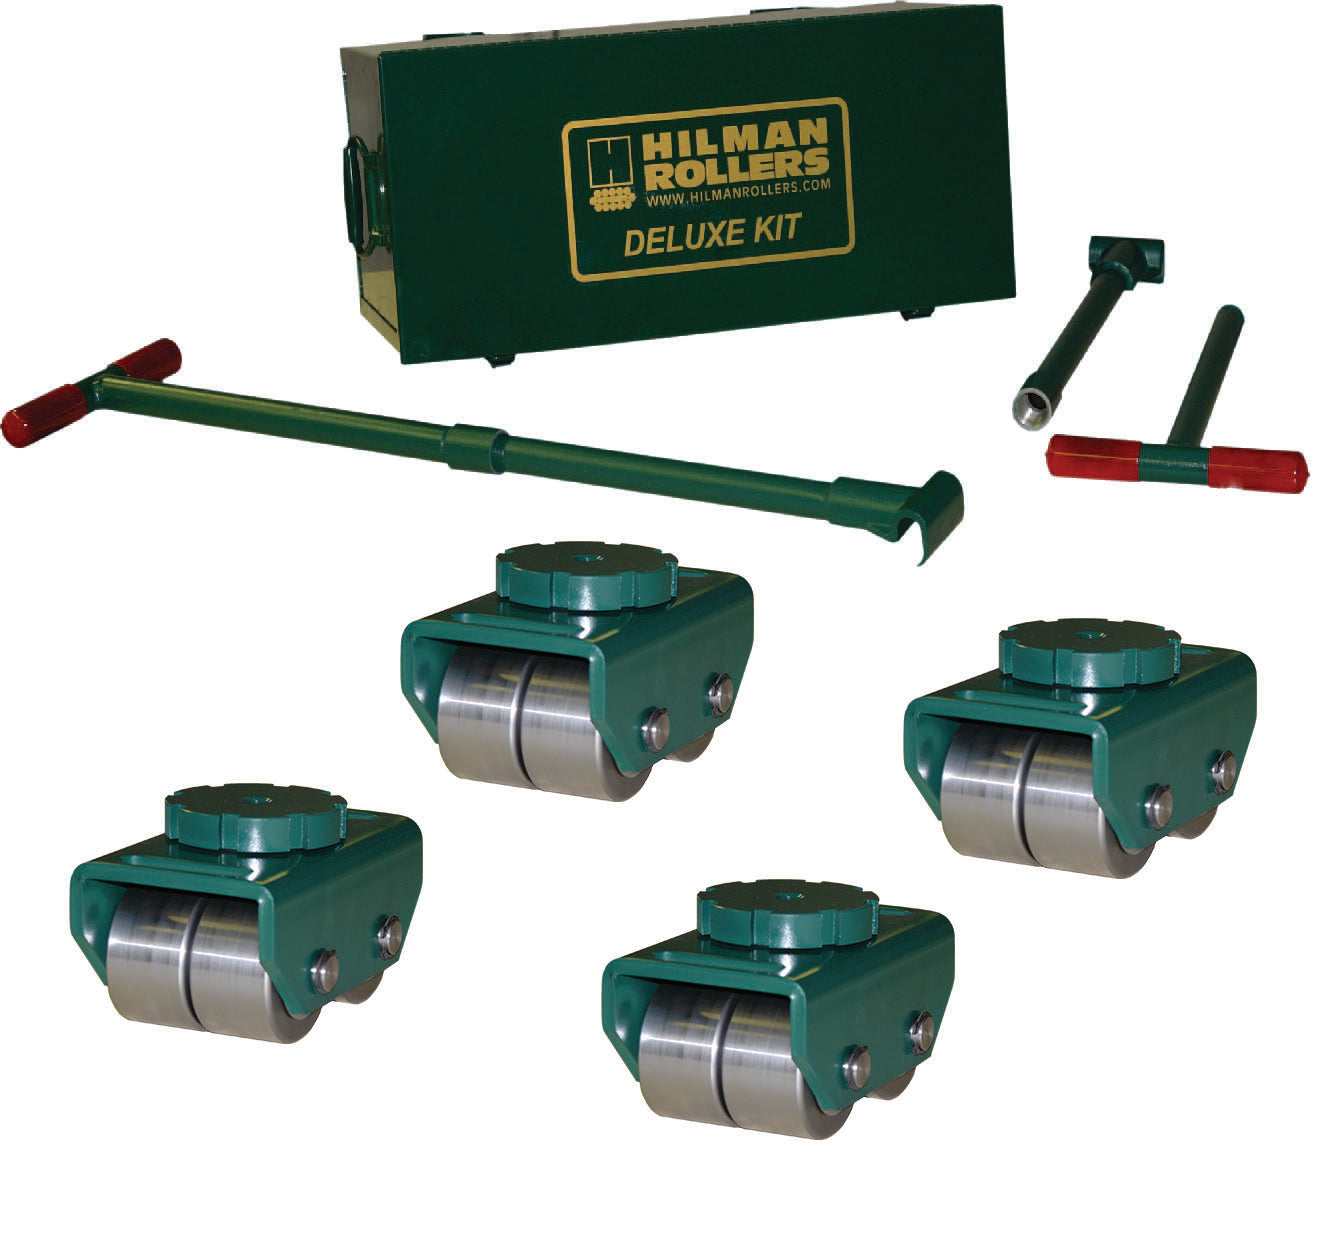 Hilman 12 Ton Swivel Smooth Top Bull Dolly Kit with Steel Wheels